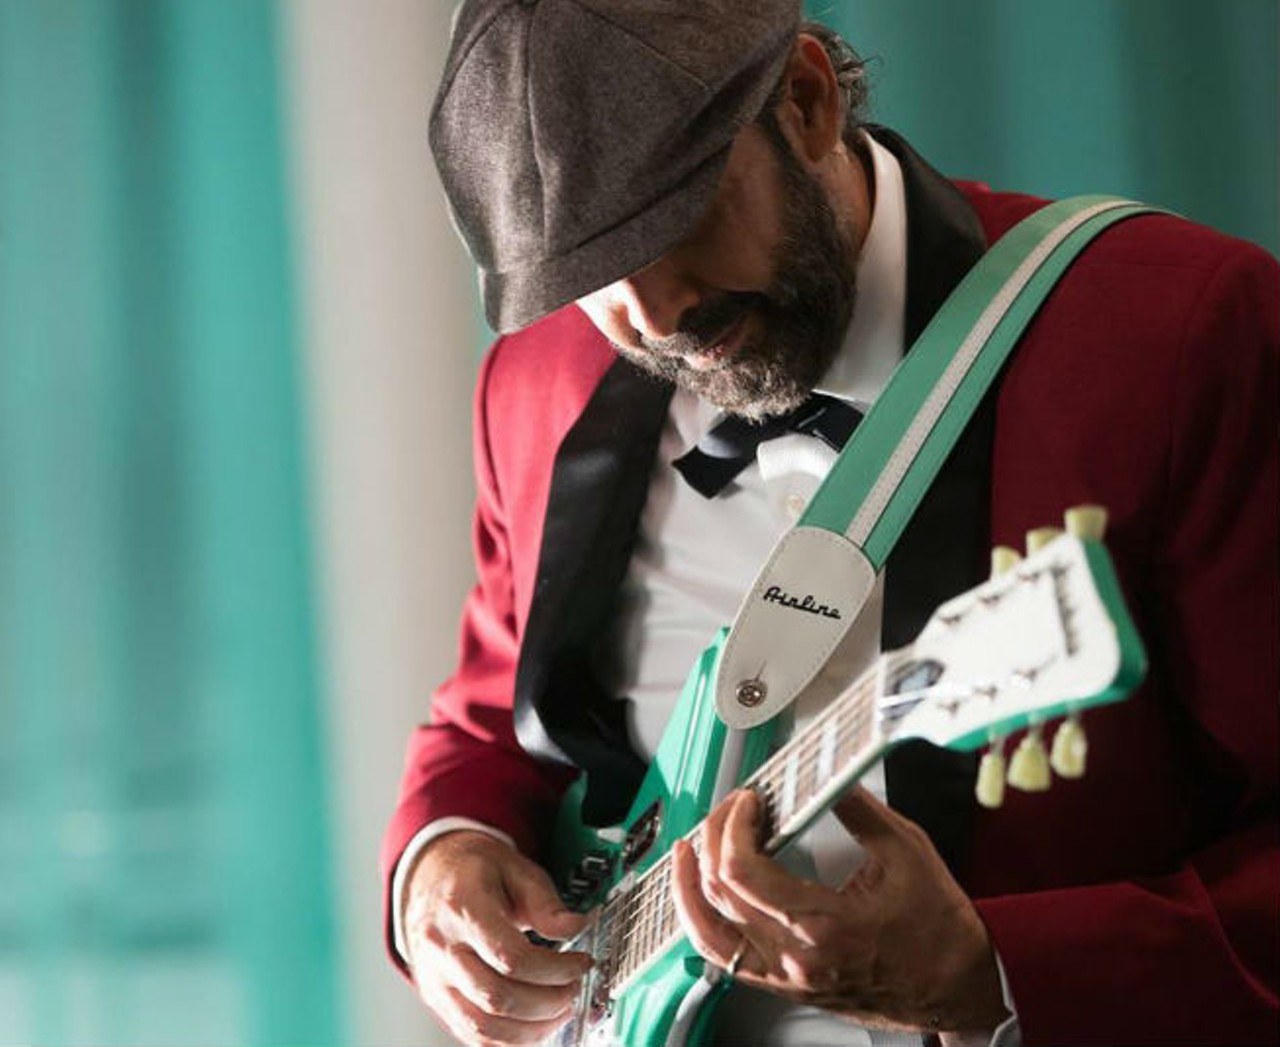 Juan Luis Guerra
7 p.m. Sept. 13 at  Amway Center, $55 - $175                         
Juan Luis Guerra brings the contagious mix of merengue and bachata that he's perfected in his 30-year career to the Todo Tiene Su Hora tour, named after his latest album. The 58-year-old Dominican singer had tremendous success last year on the Billboard Latin Airplay chart with "Tus Besos," the doo-wop-inspired single from the album.